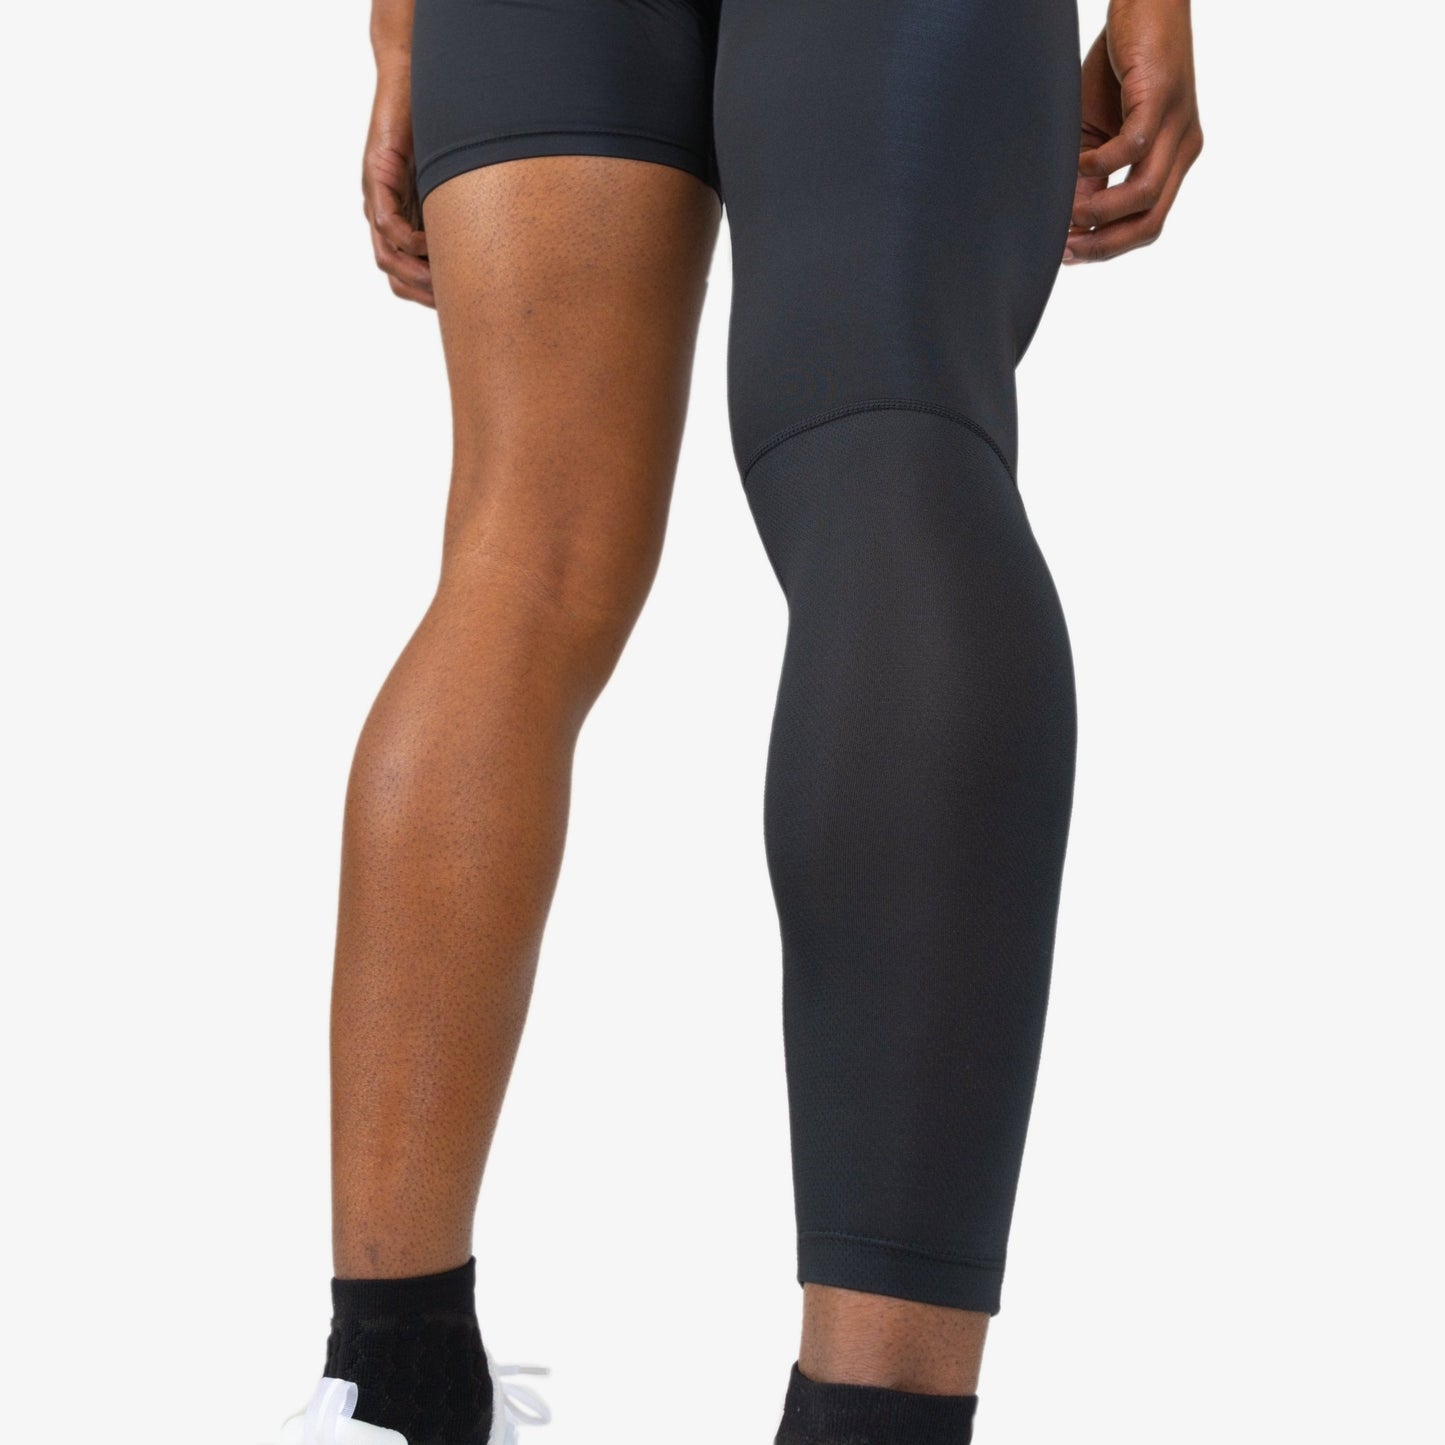 We Ball Sports Athletic Compression Tights